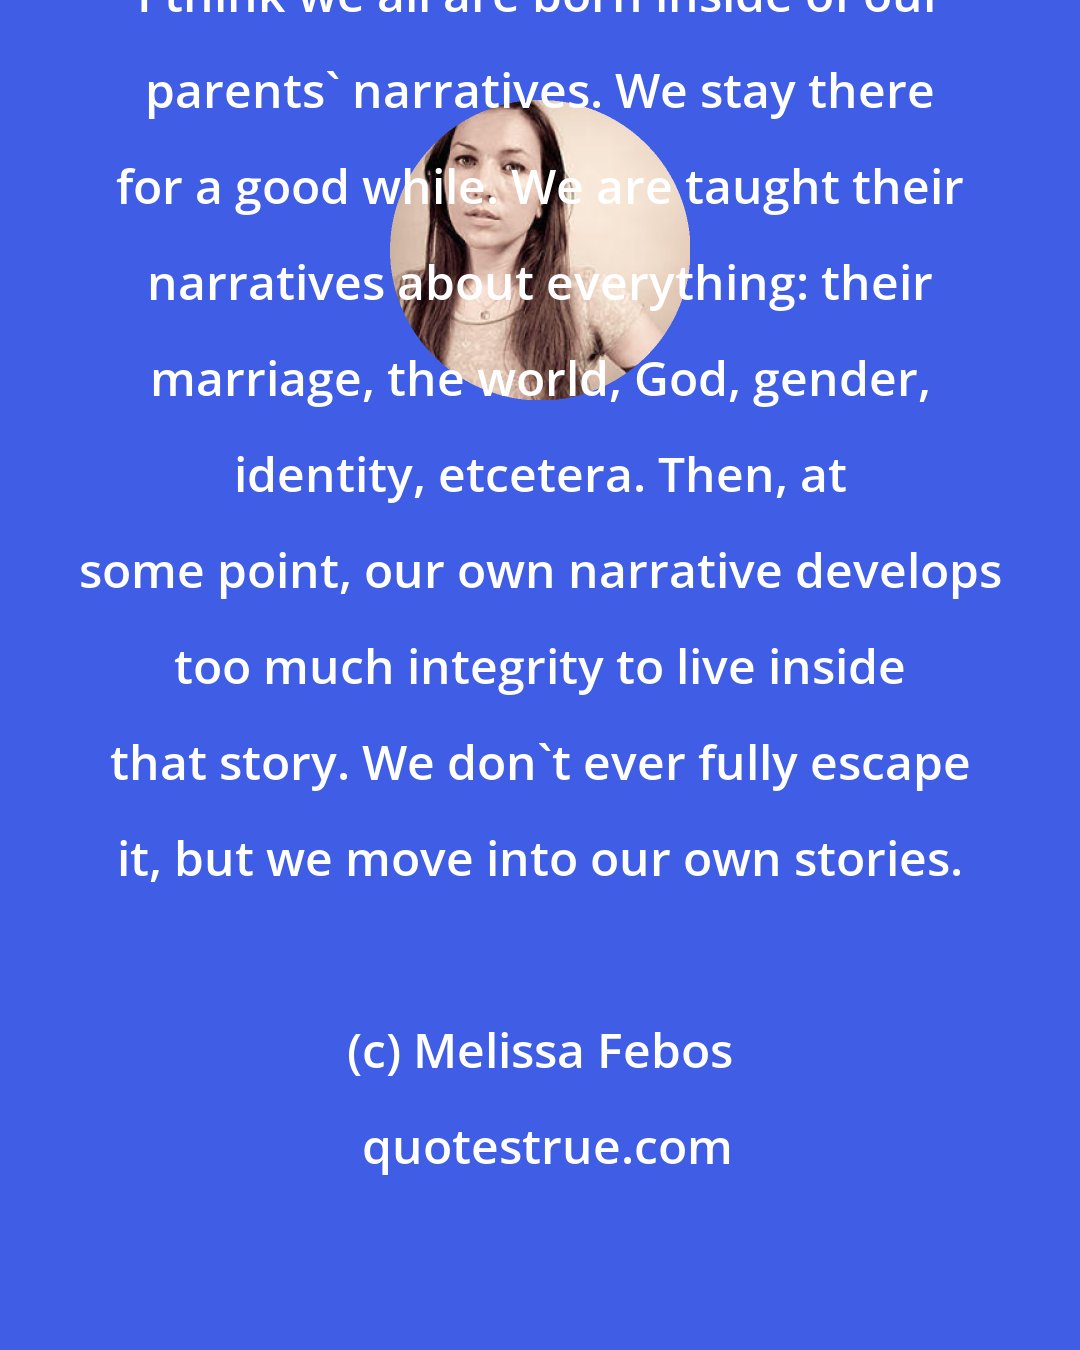 Melissa Febos: I think we all are born inside of our parents' narratives. We stay there for a good while. We are taught their narratives about everything: their marriage, the world, God, gender, identity, etcetera. Then, at some point, our own narrative develops too much integrity to live inside that story. We don't ever fully escape it, but we move into our own stories.